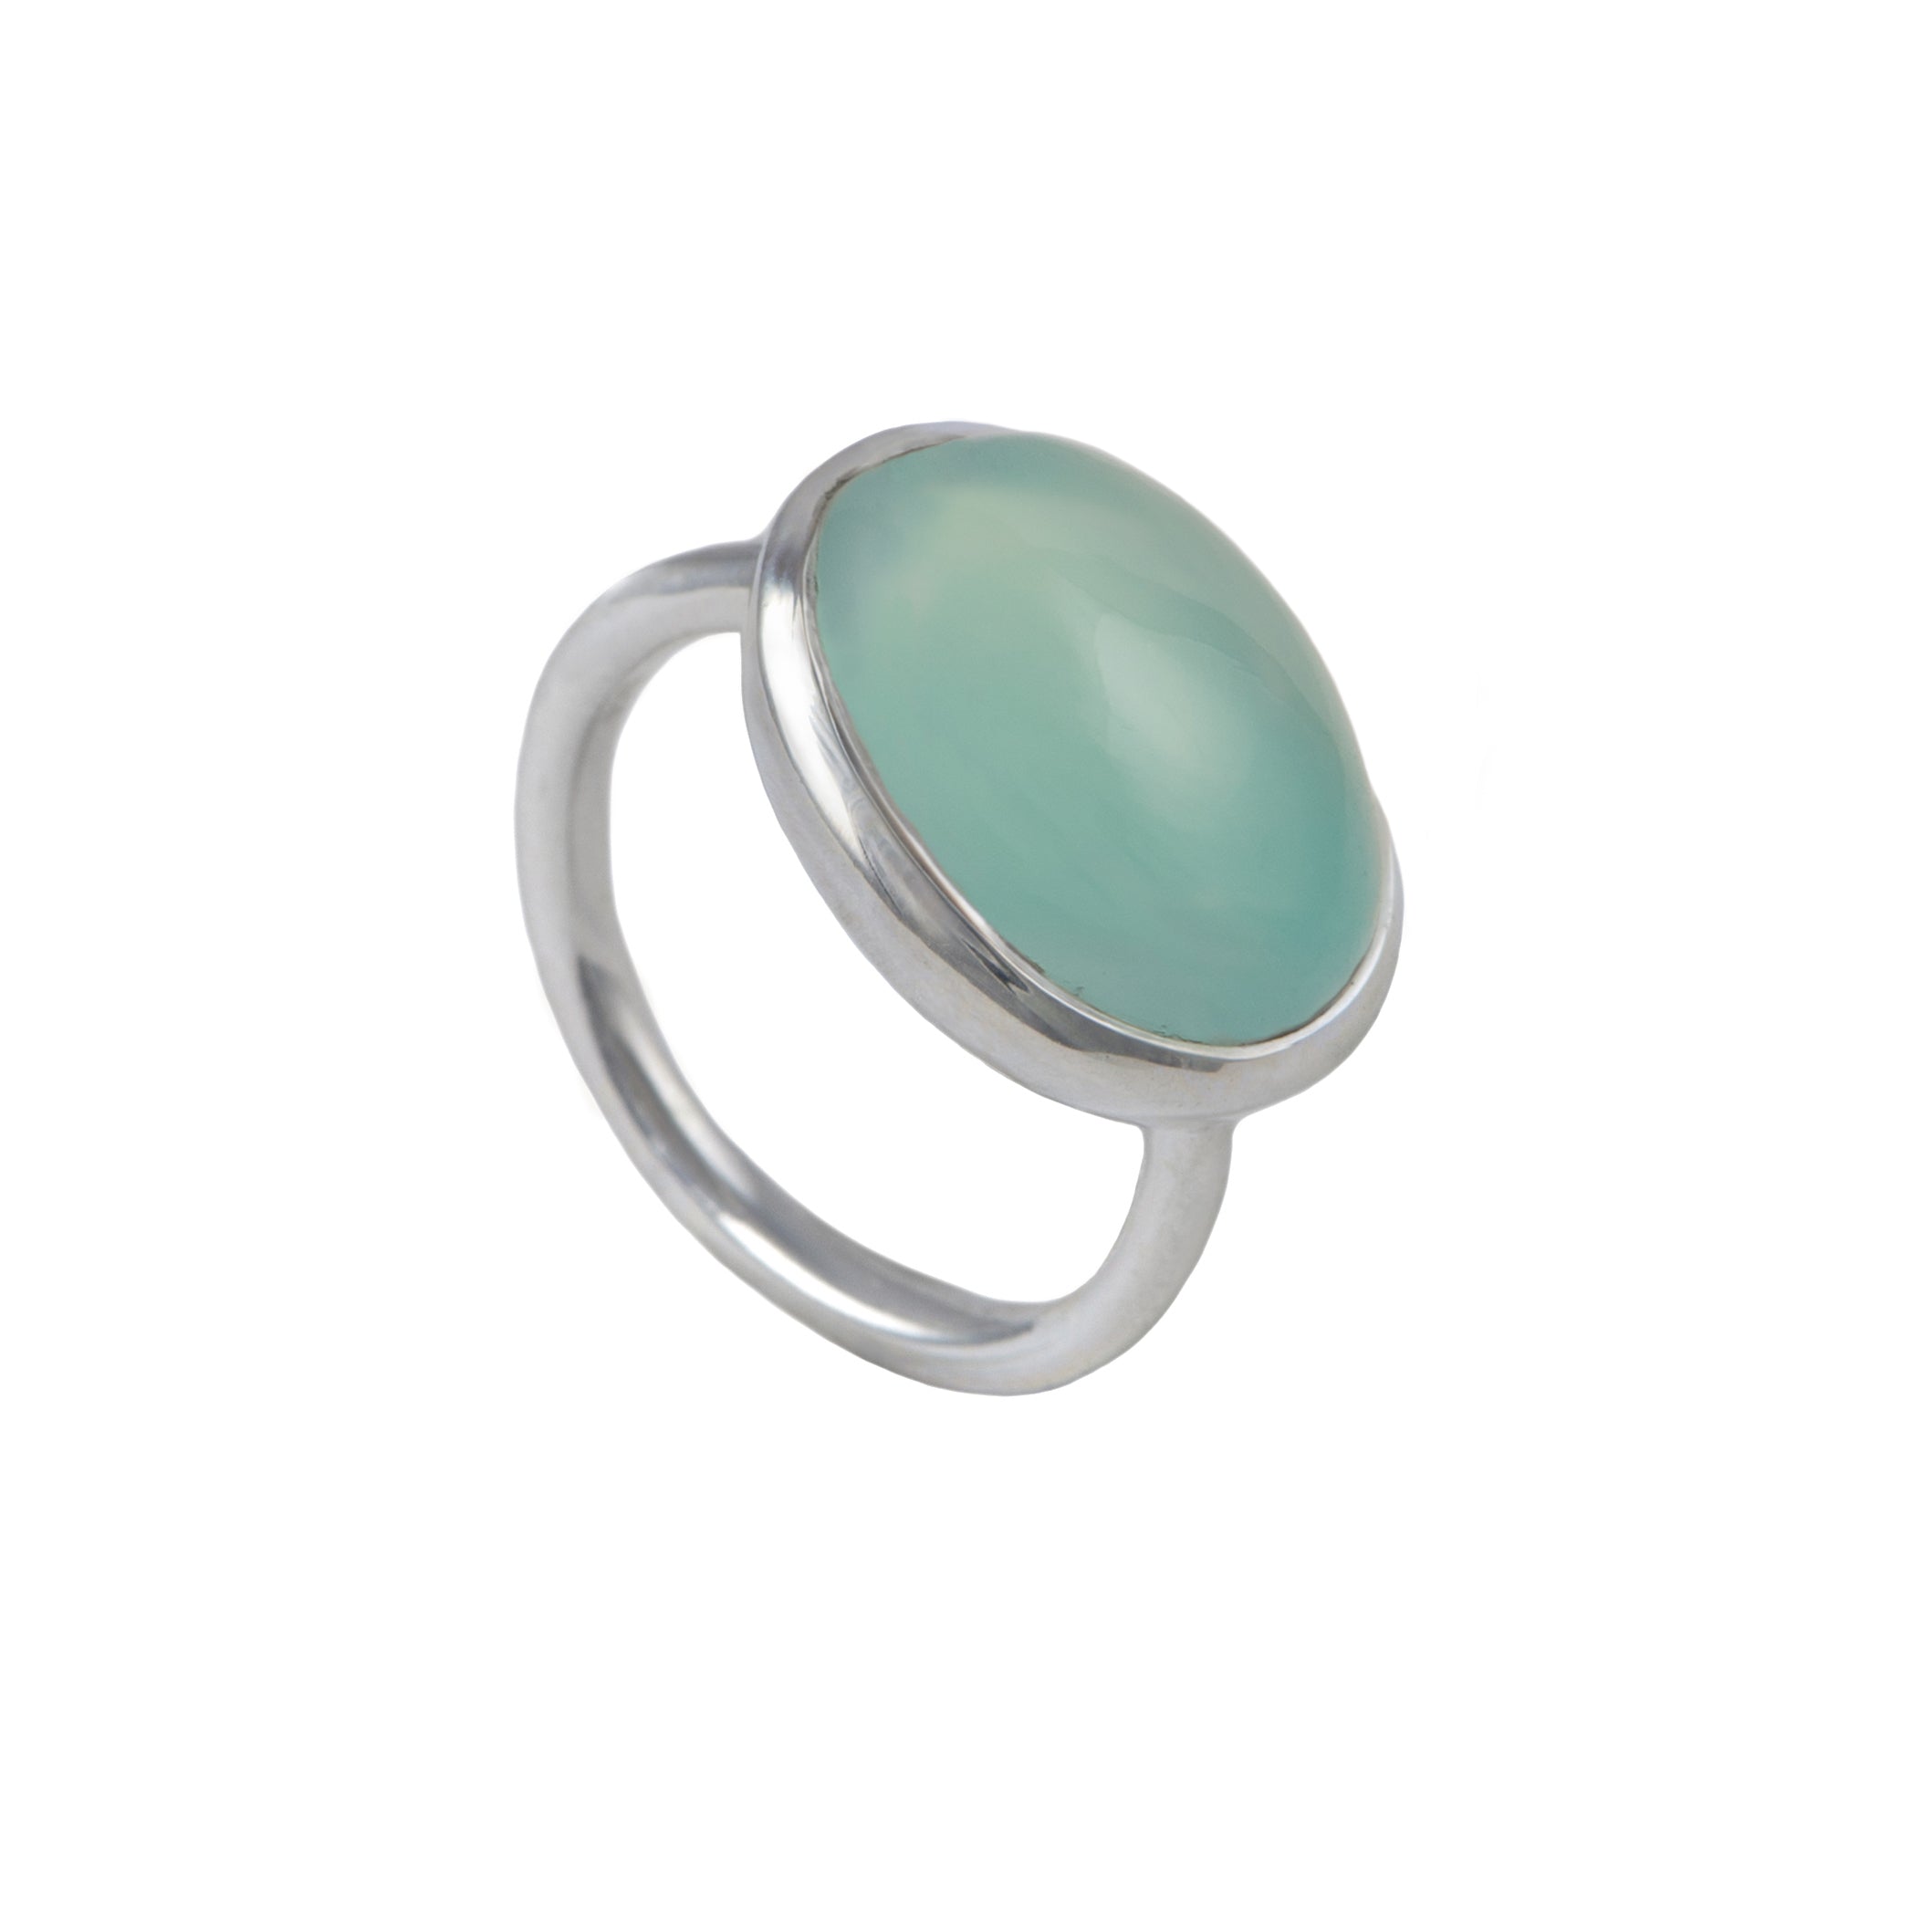 Cabochon Oval Cut Natural Gemstone Sterling Silver Ring - Aqua Chalcedony